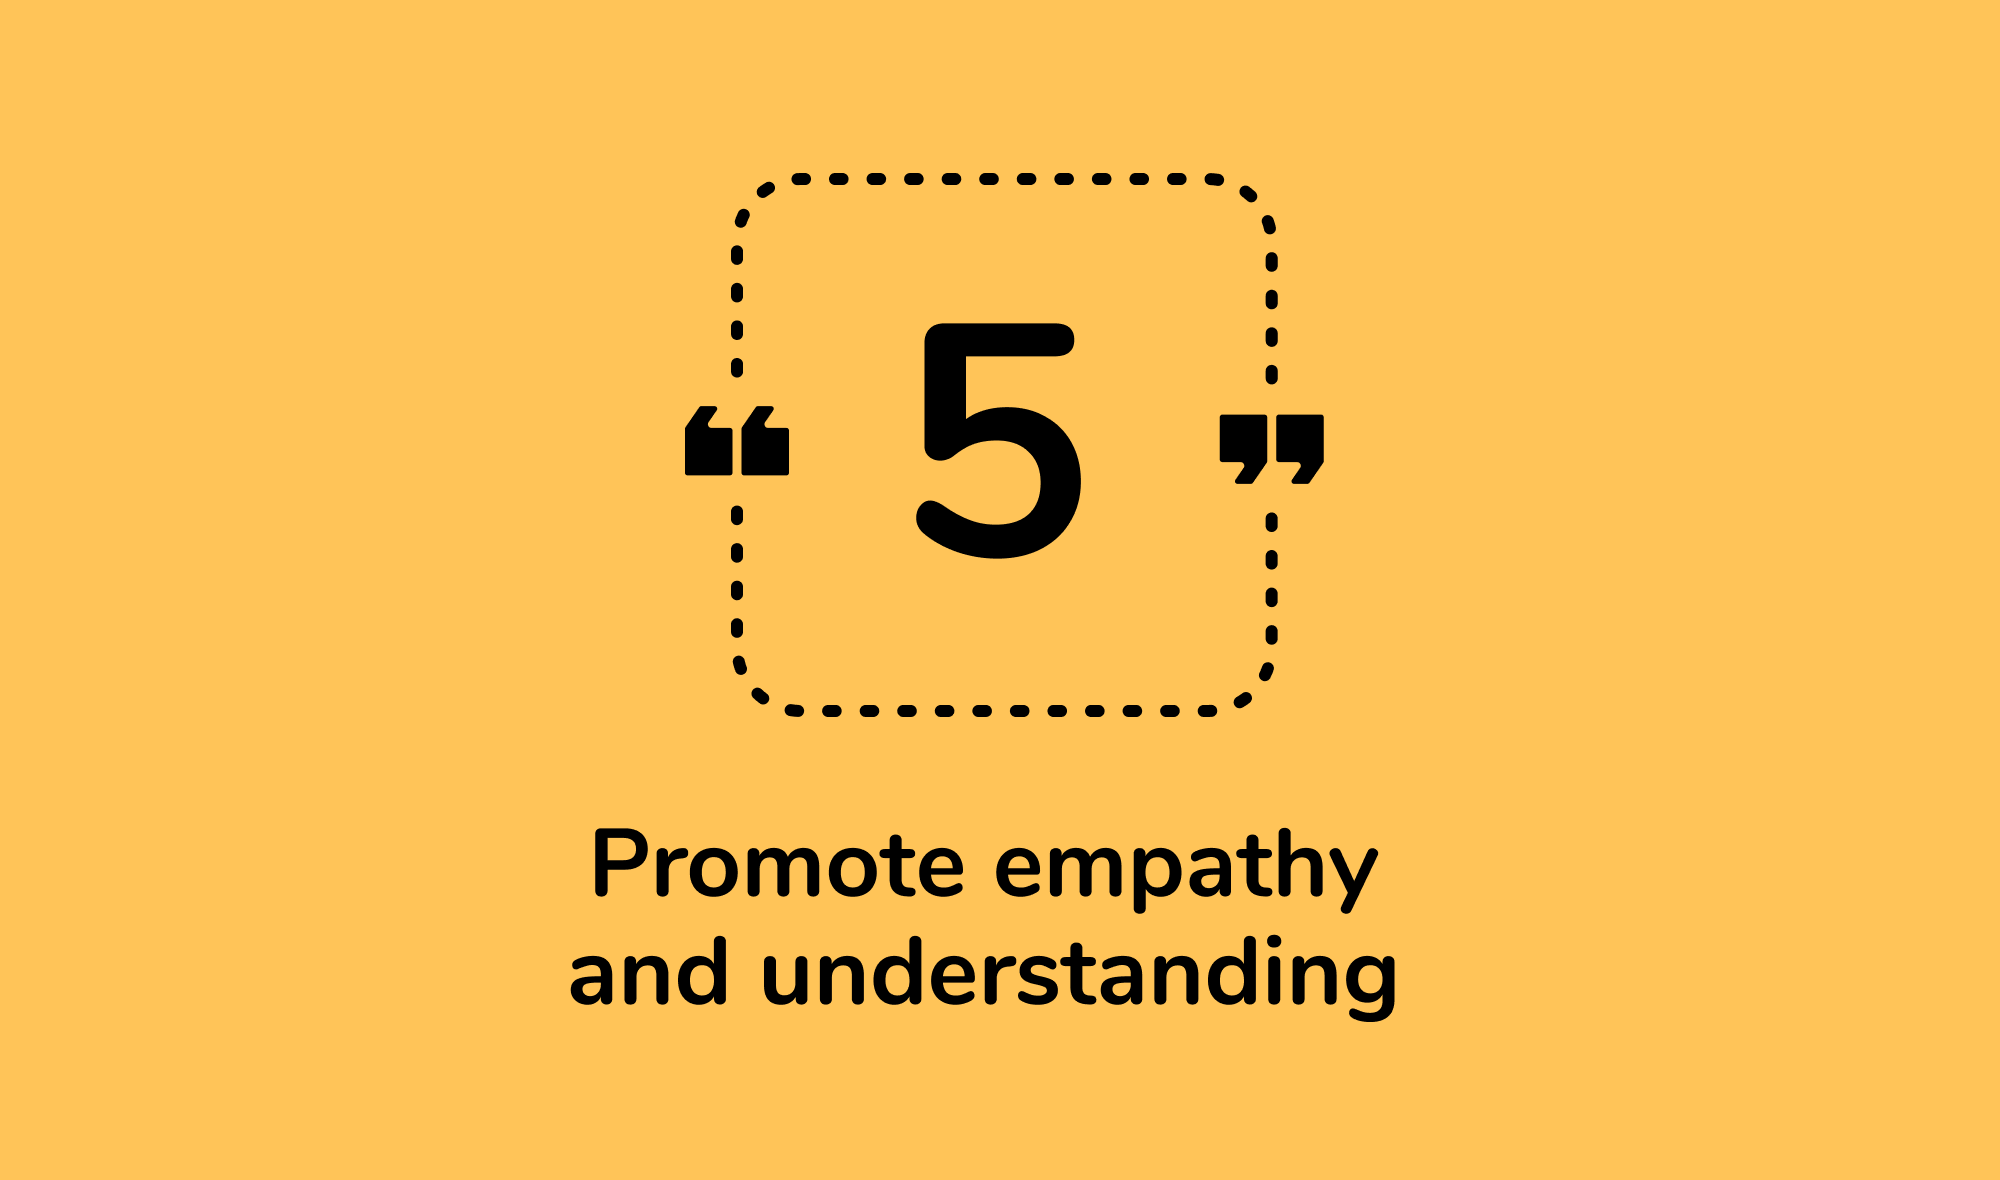 5. Promote empathy and understanding